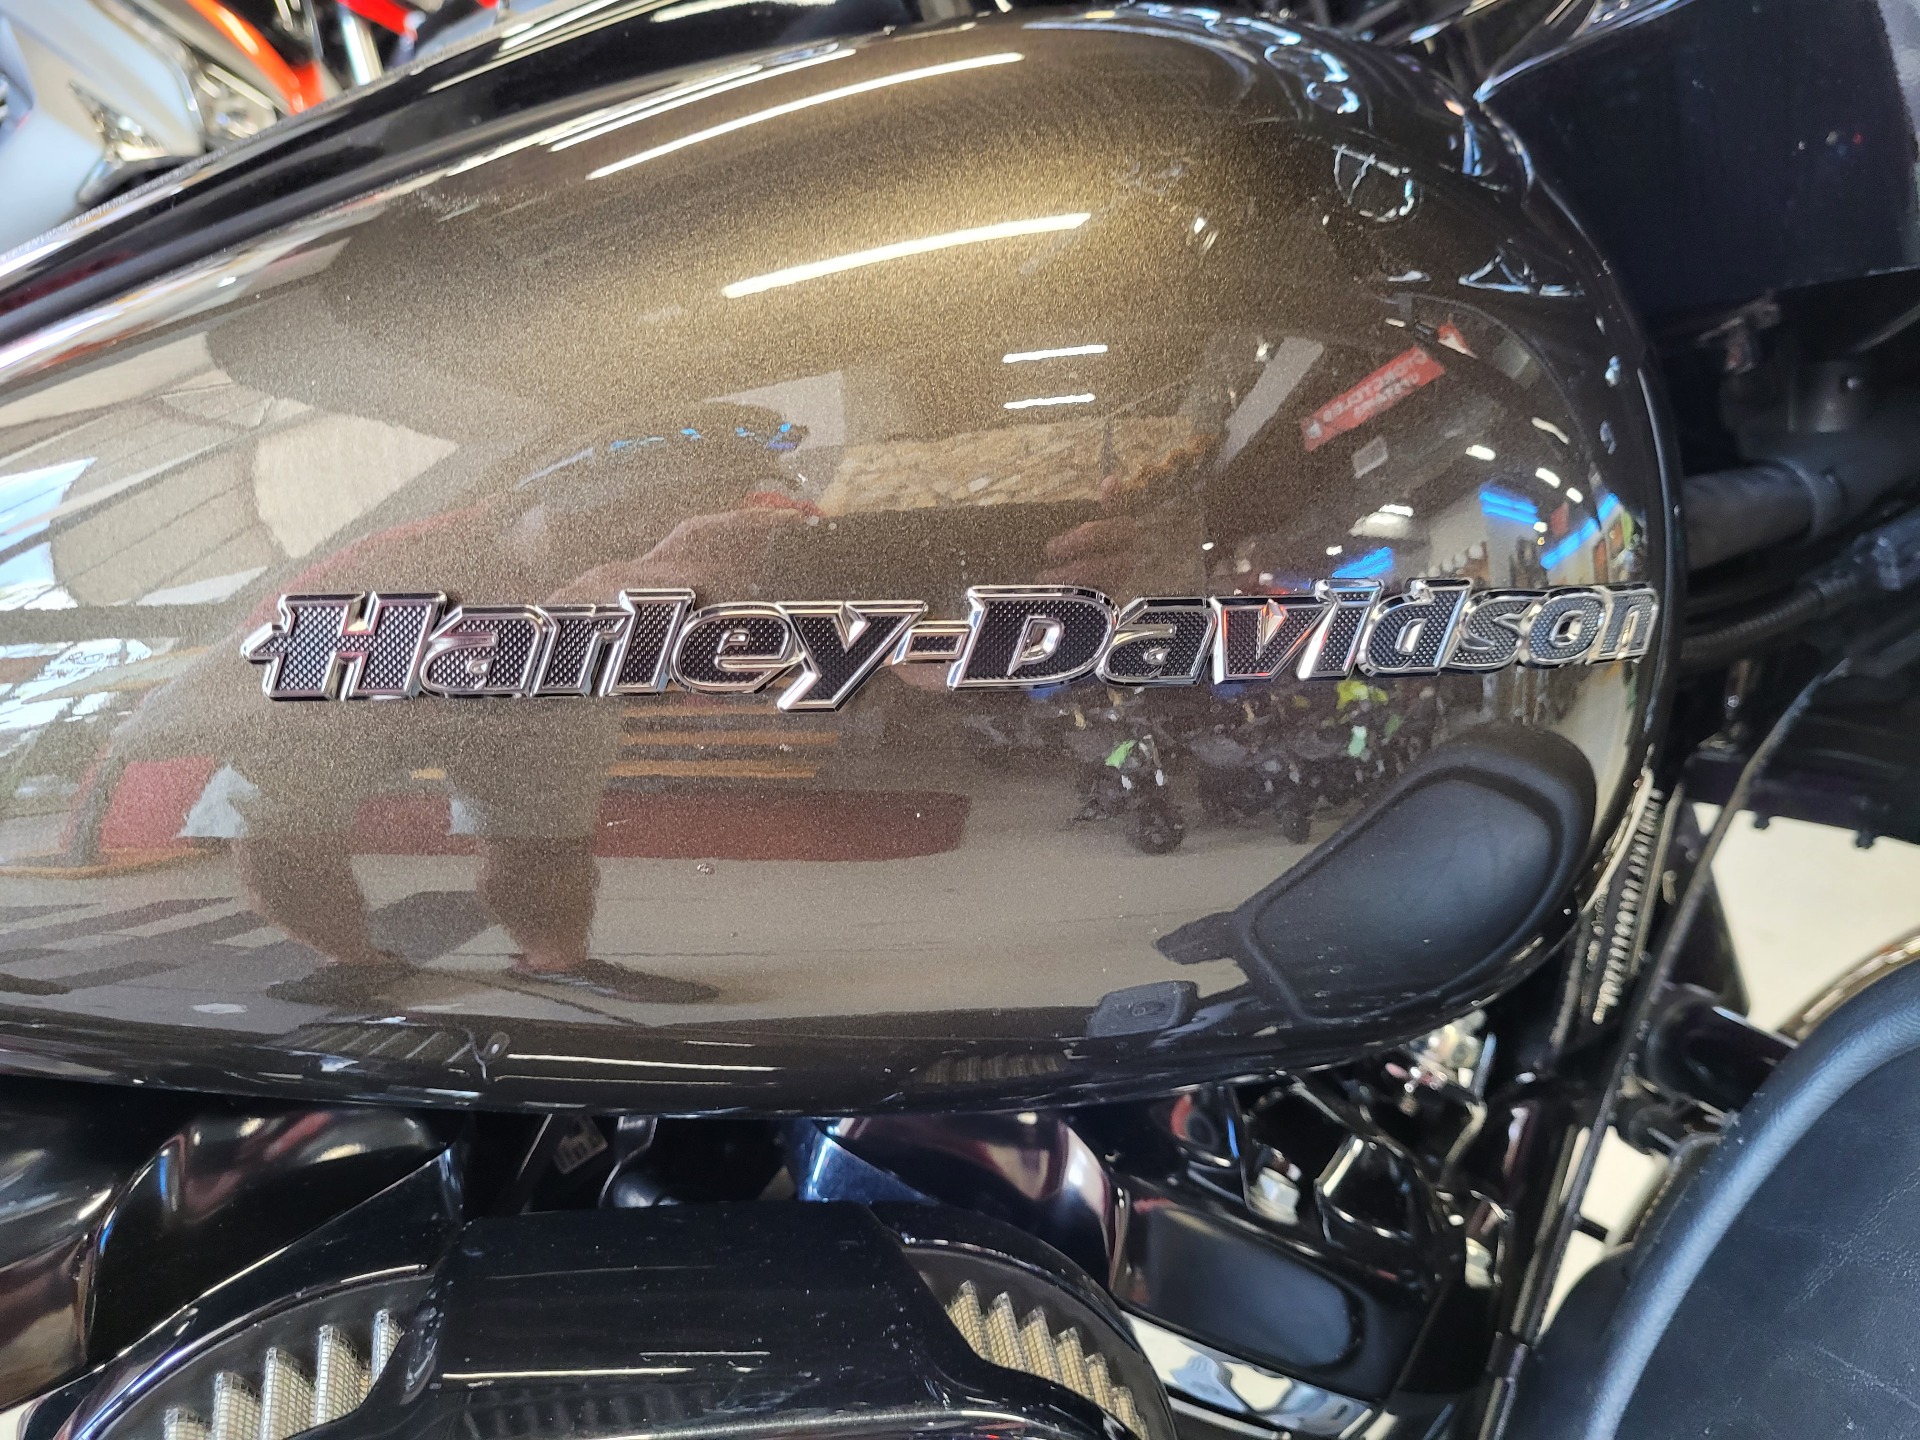 2020 Harley-Davidson Ultra Limited in Fort Myers, Florida - Photo 12